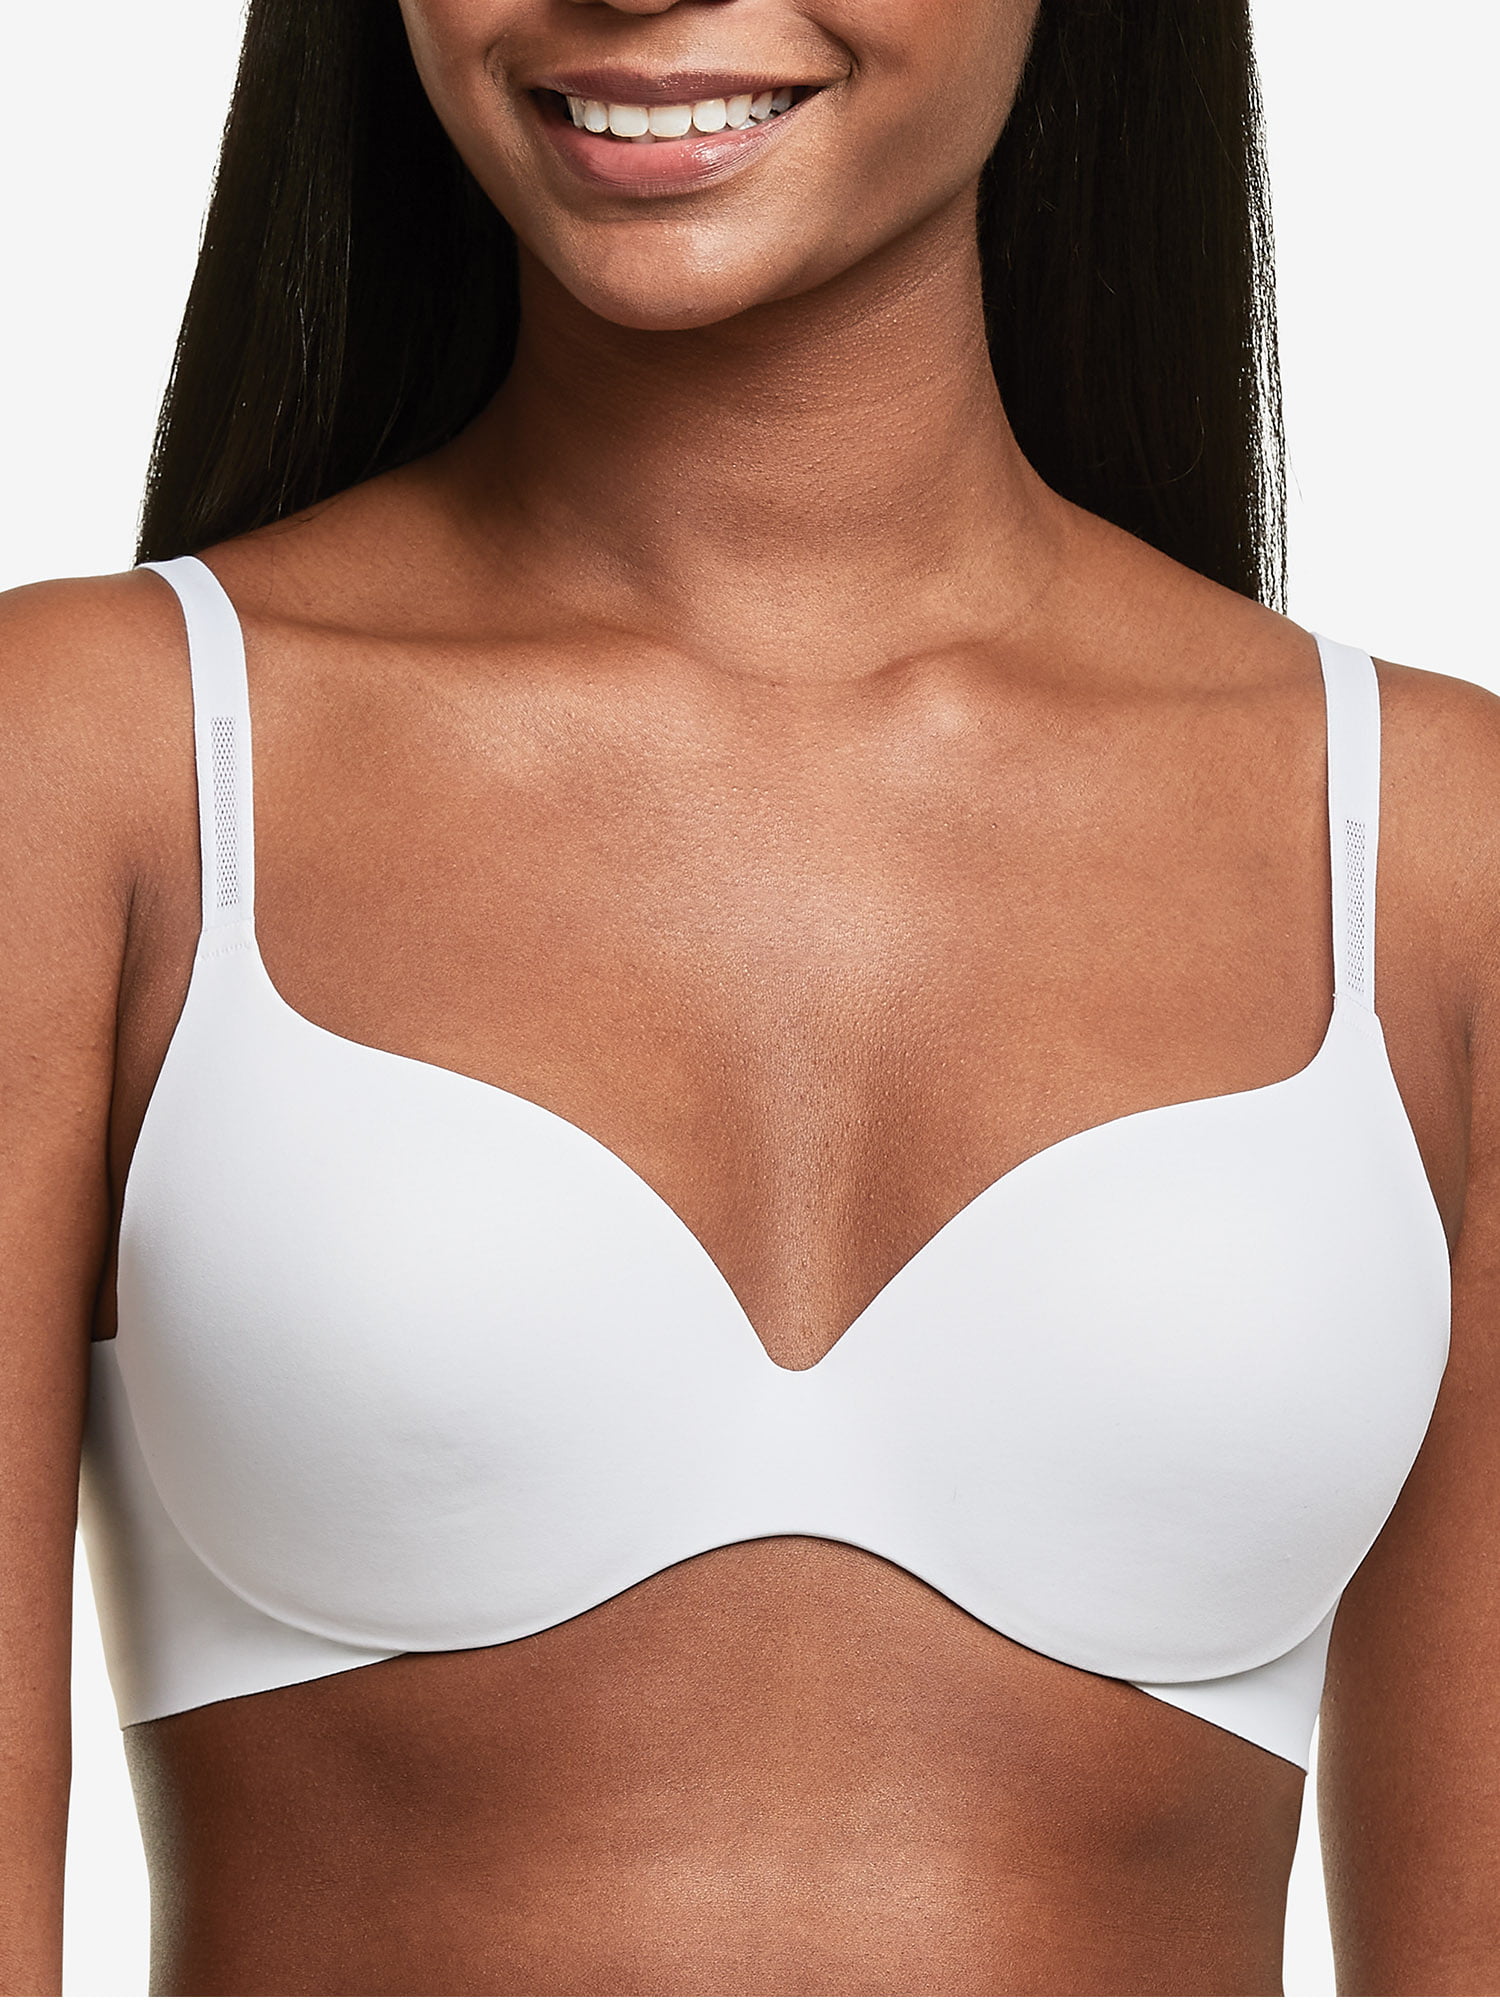 Details about   Women's Bra by Fruit of Loom Size 28 Size 38 White Padded Thin Straps NEW 